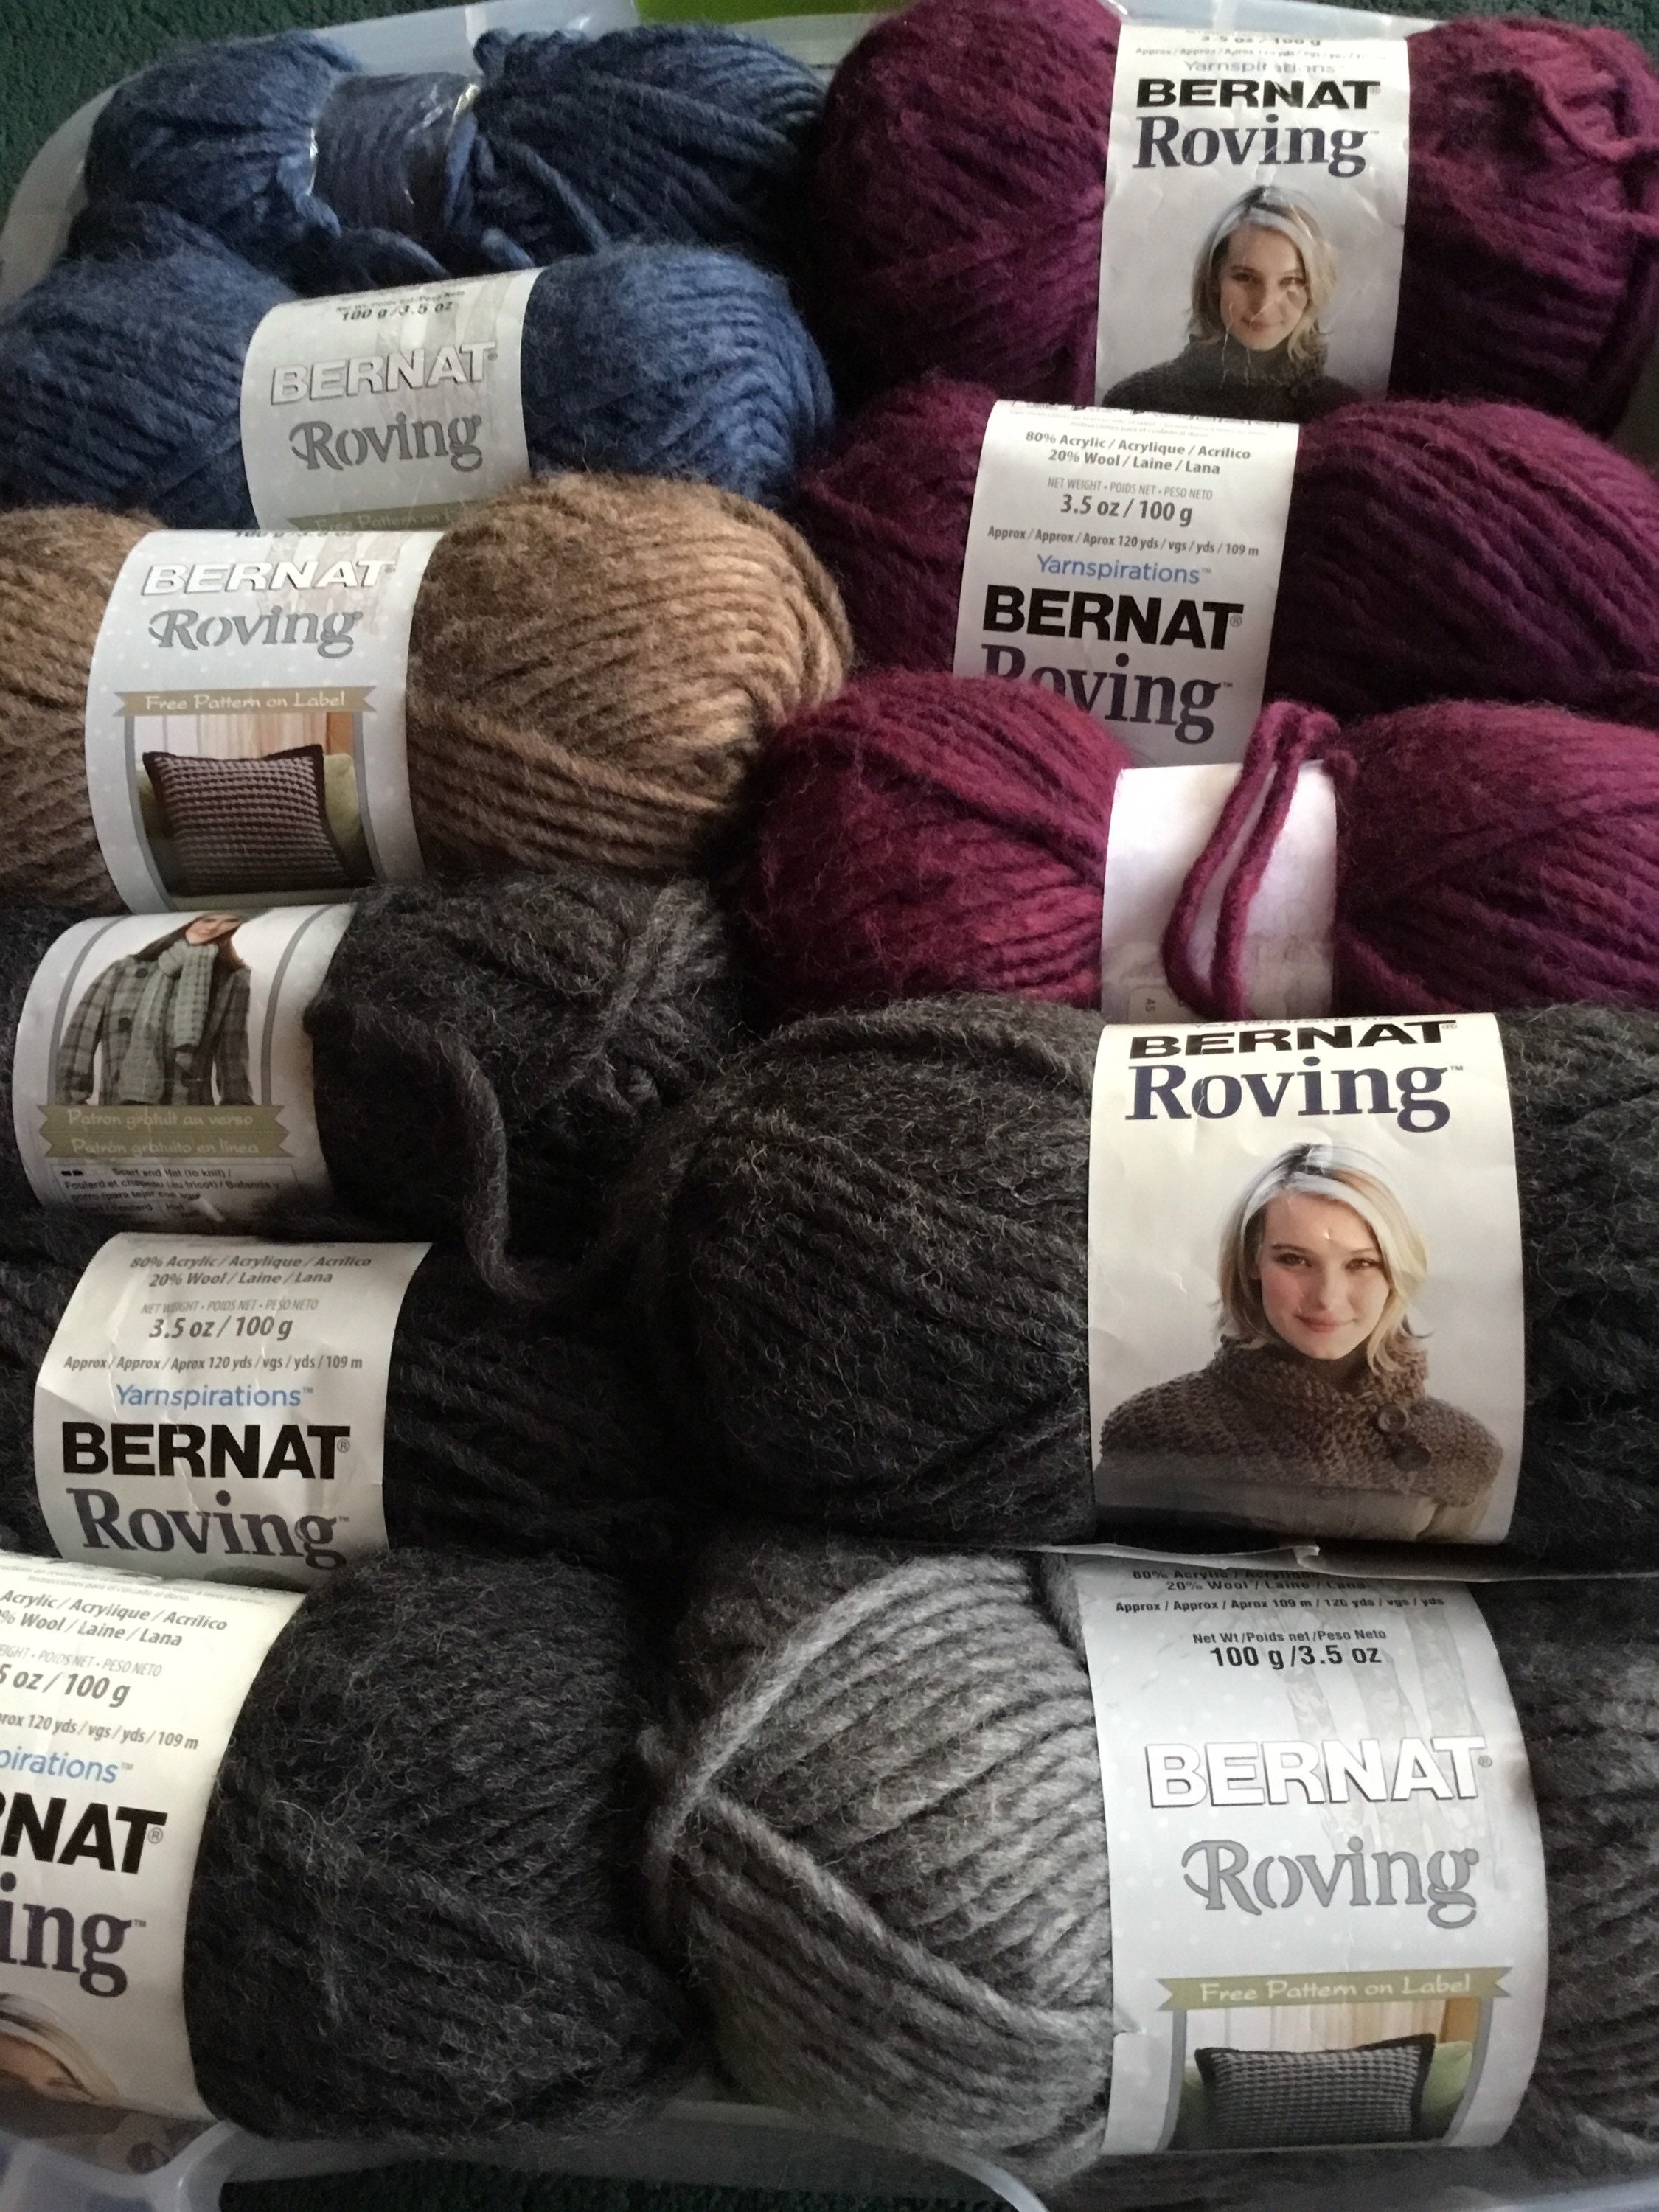 Mainstays Roving Yarn Value Bundle, 100% Acrylic, 26 yd, Soft Silver, Super Bulky, Pack of 12